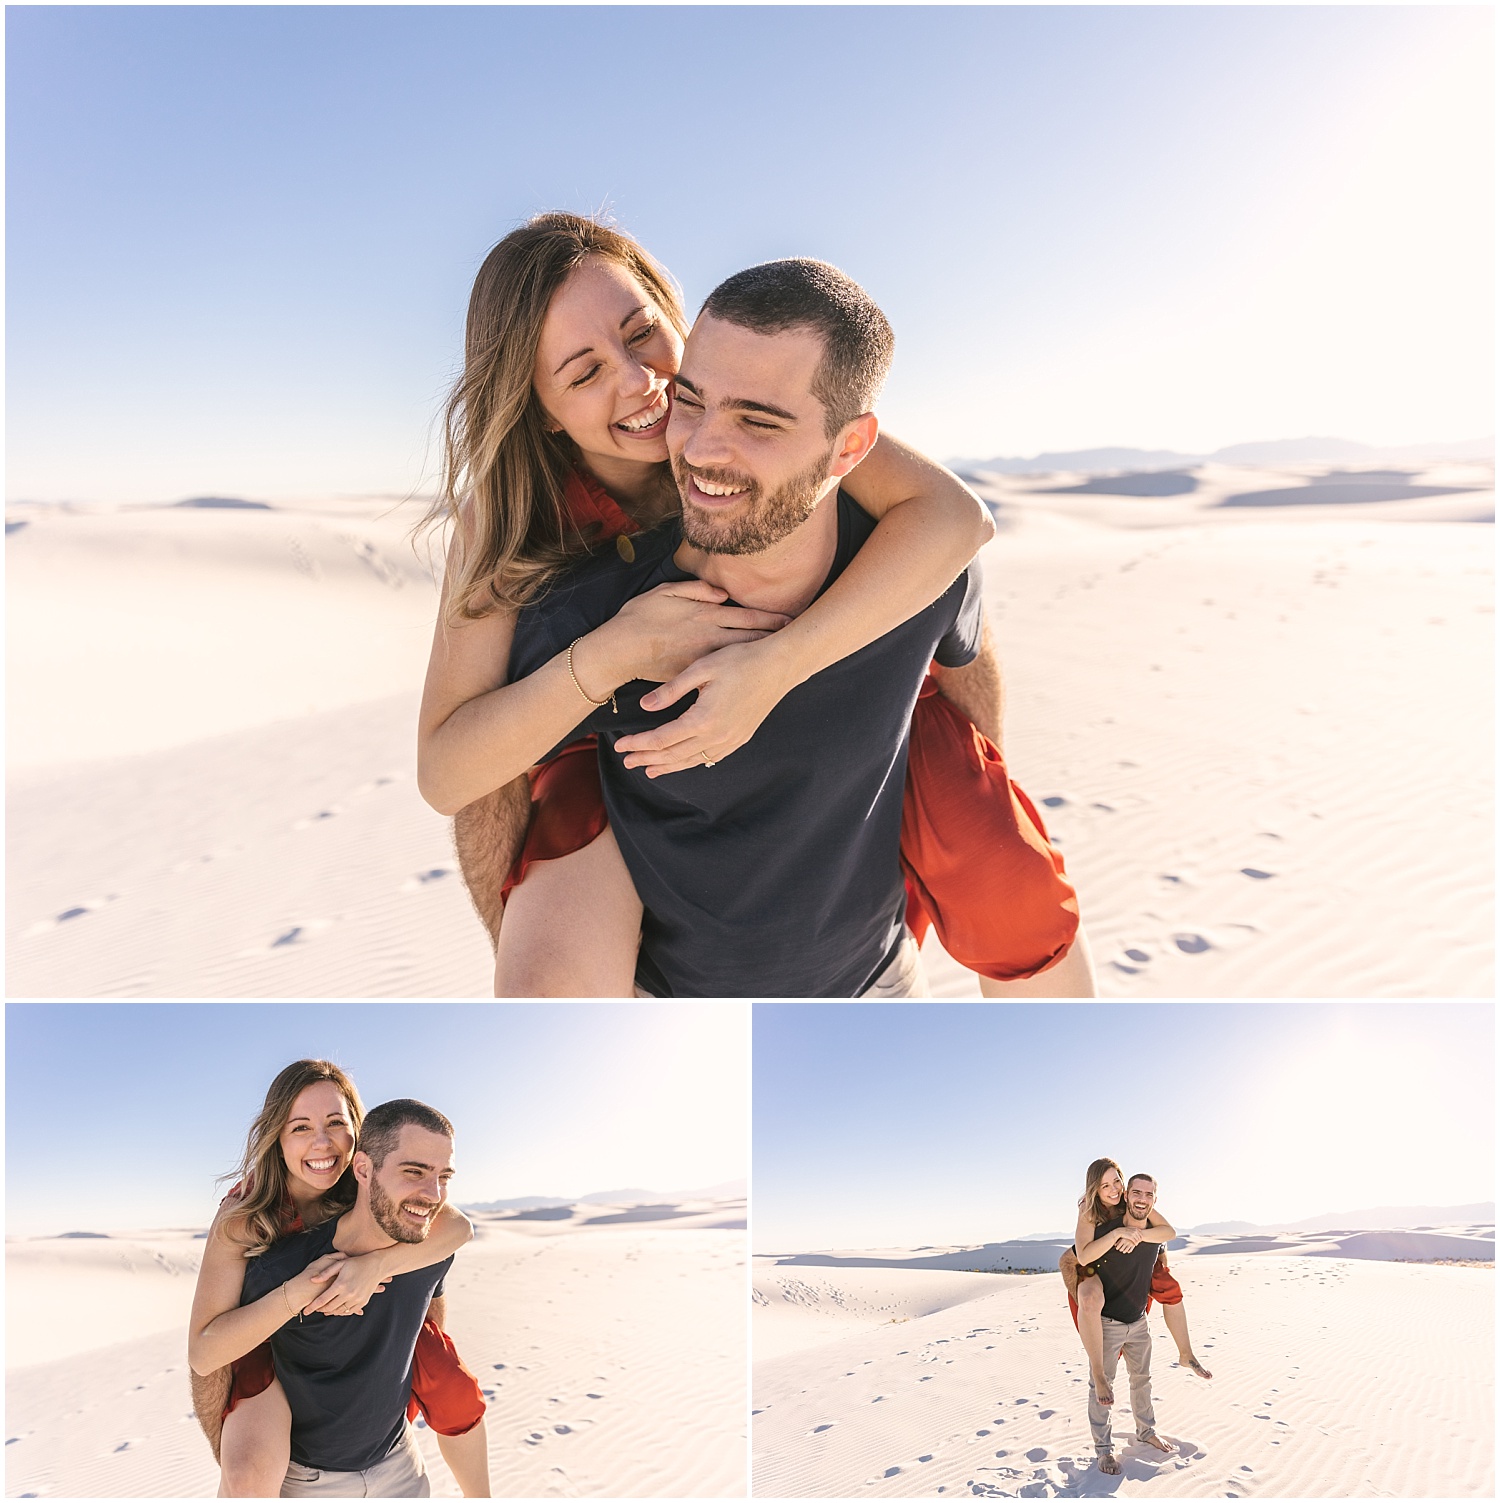 Piggyback ride for engagement photos at White Sands